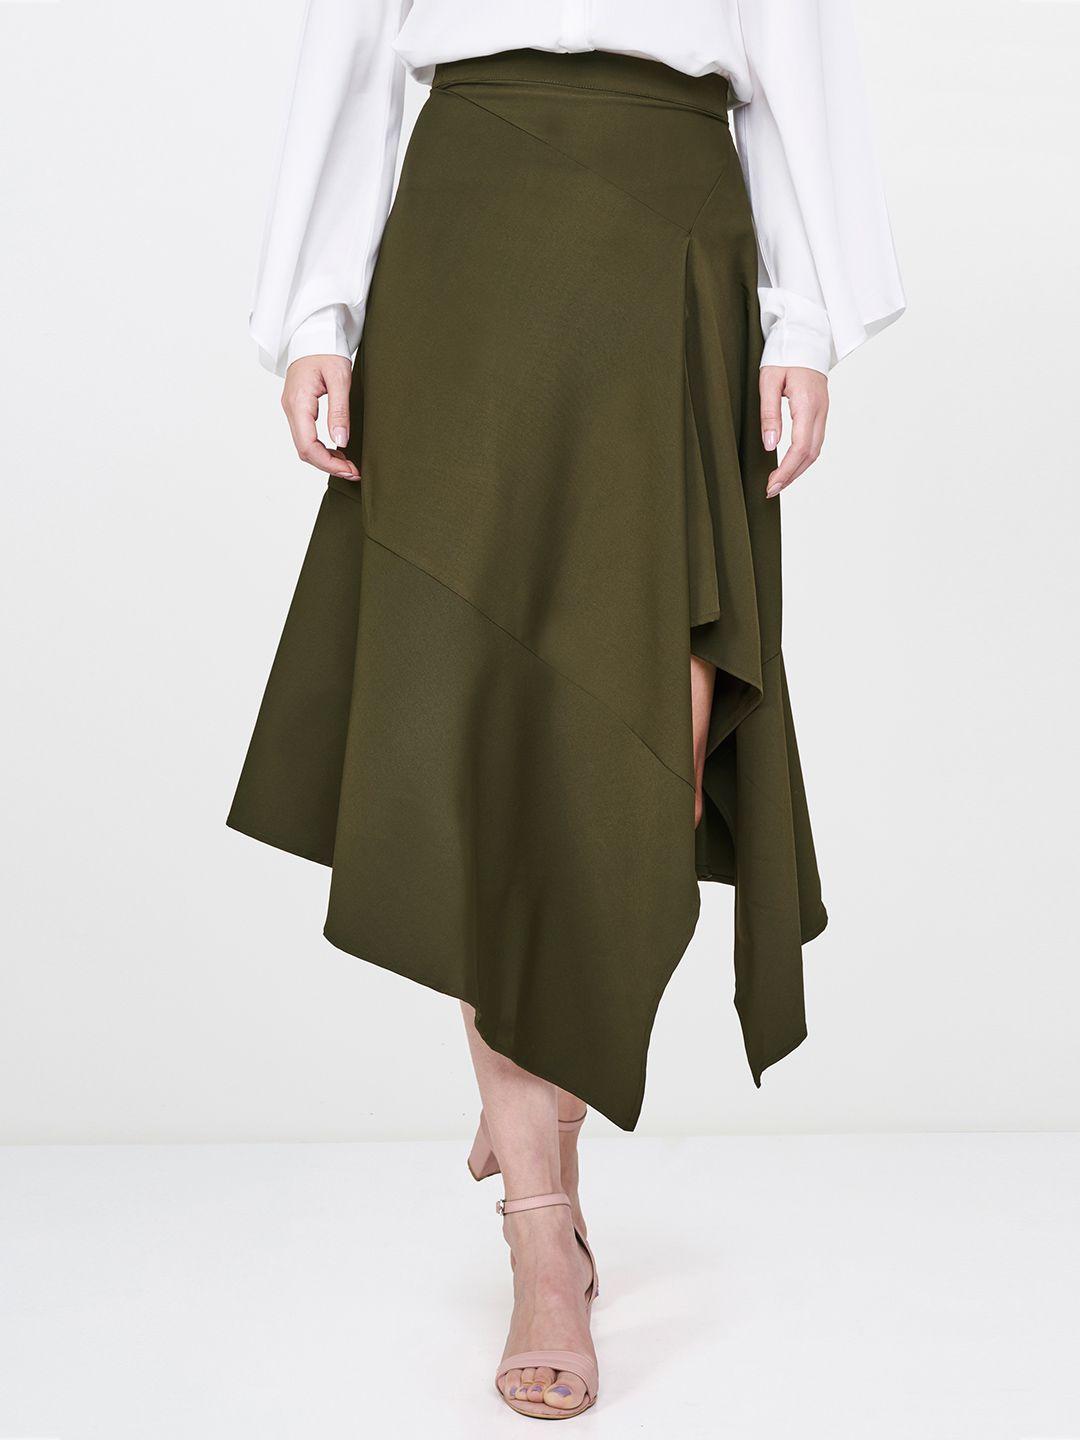 and-women-olive-green-a-line-skirt